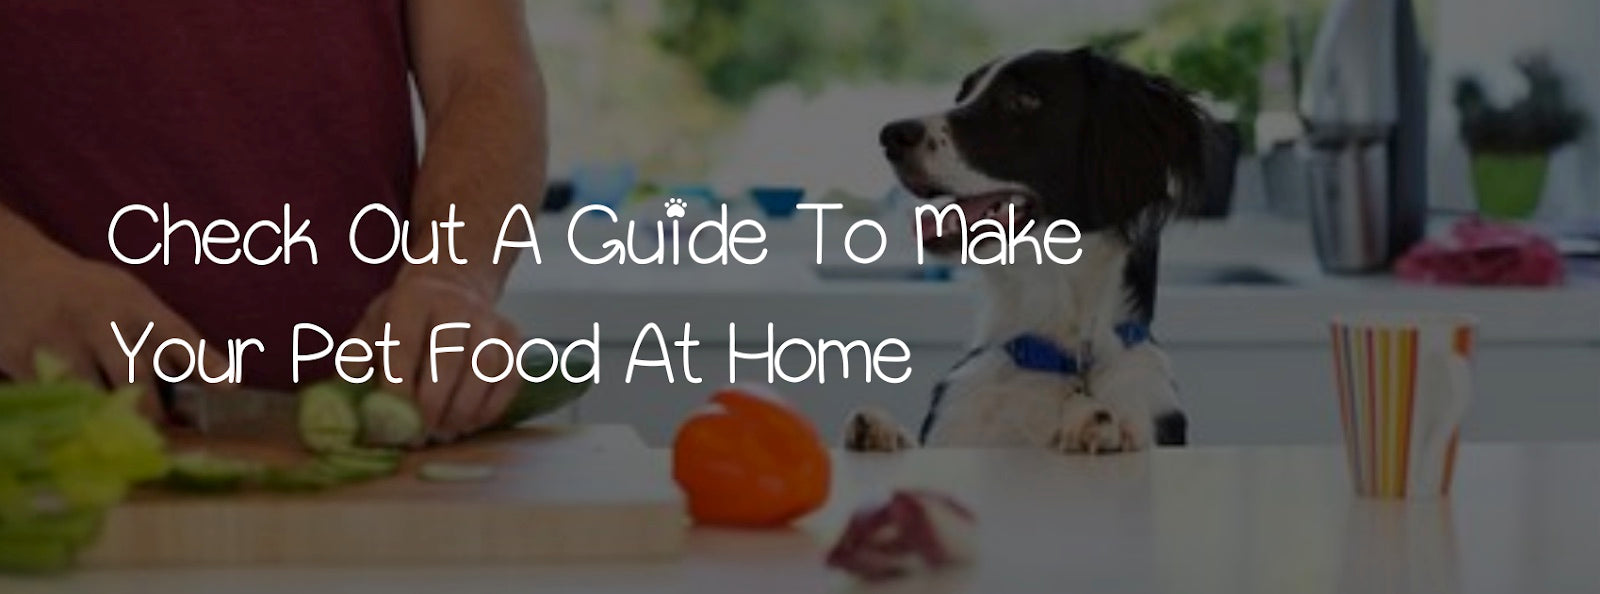 CHECK OUT A GUIDE TO MAKE YOUR PET FOOD AT HOME